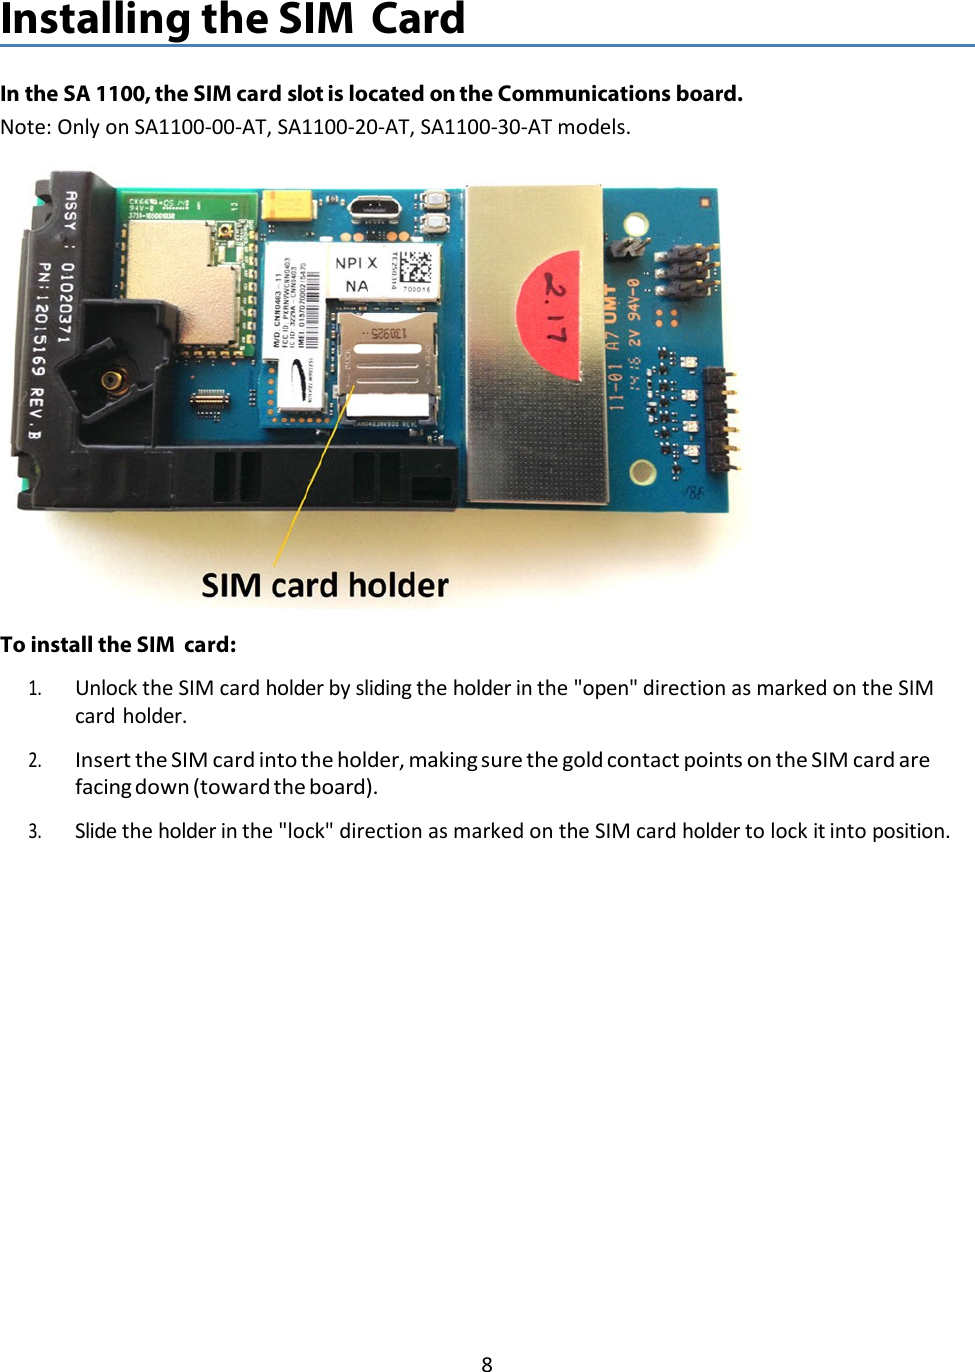 8   Installing the SIM Card   In the SA 1100, the SIM card slot is located on the Communications board. Note: Only on SA1100-00-AT, SA1100-20-AT, SA1100-30-AT models.    To install the SIM card: 1. Unlock the SIM card holder by sliding the holder in the &quot;open&quot; direction as marked on the SIM card holder. 2. Insert the SIM card into the holder, making sure the gold contact points on the SIM card are facing down (toward the board). 3. Slide the holder in the &quot;lock&quot; direction as marked on the SIM card holder to lock it into position. 